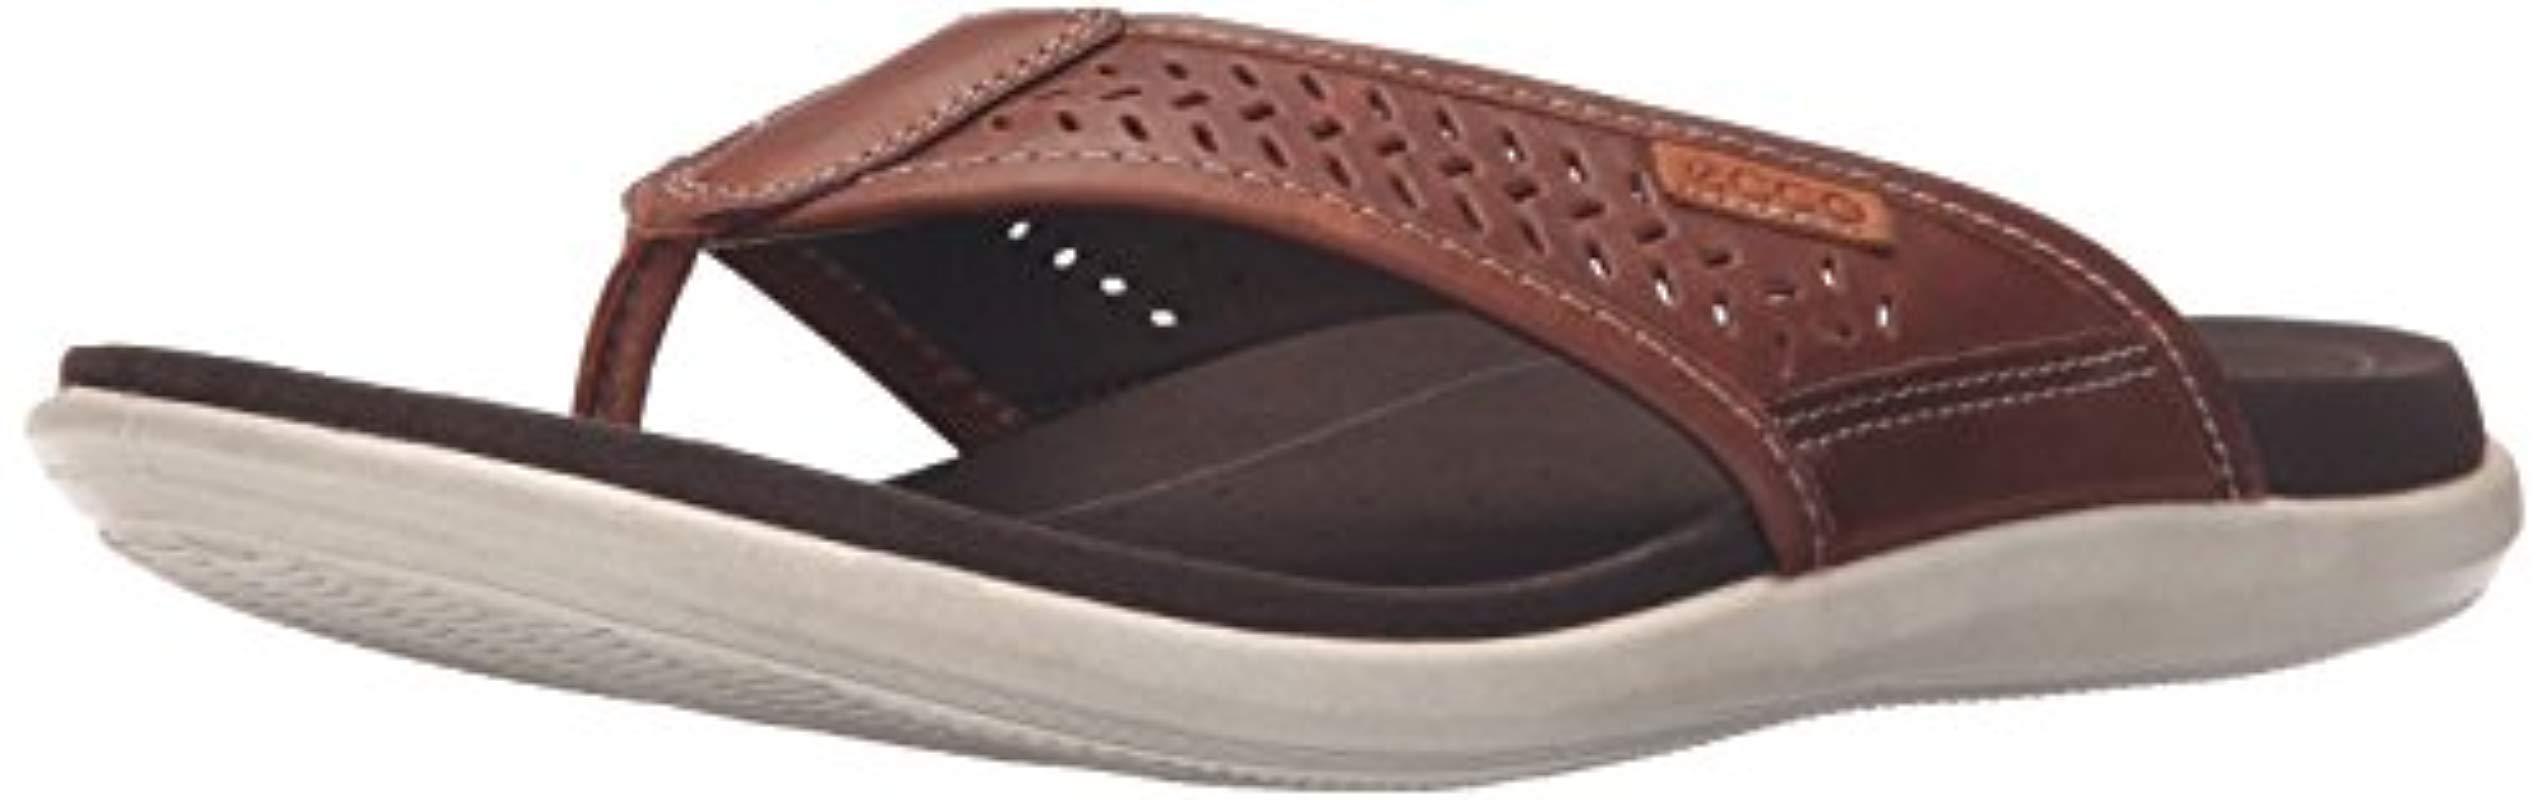 Ecco Leather Collin Thong Flip-flop for Men - Lyst